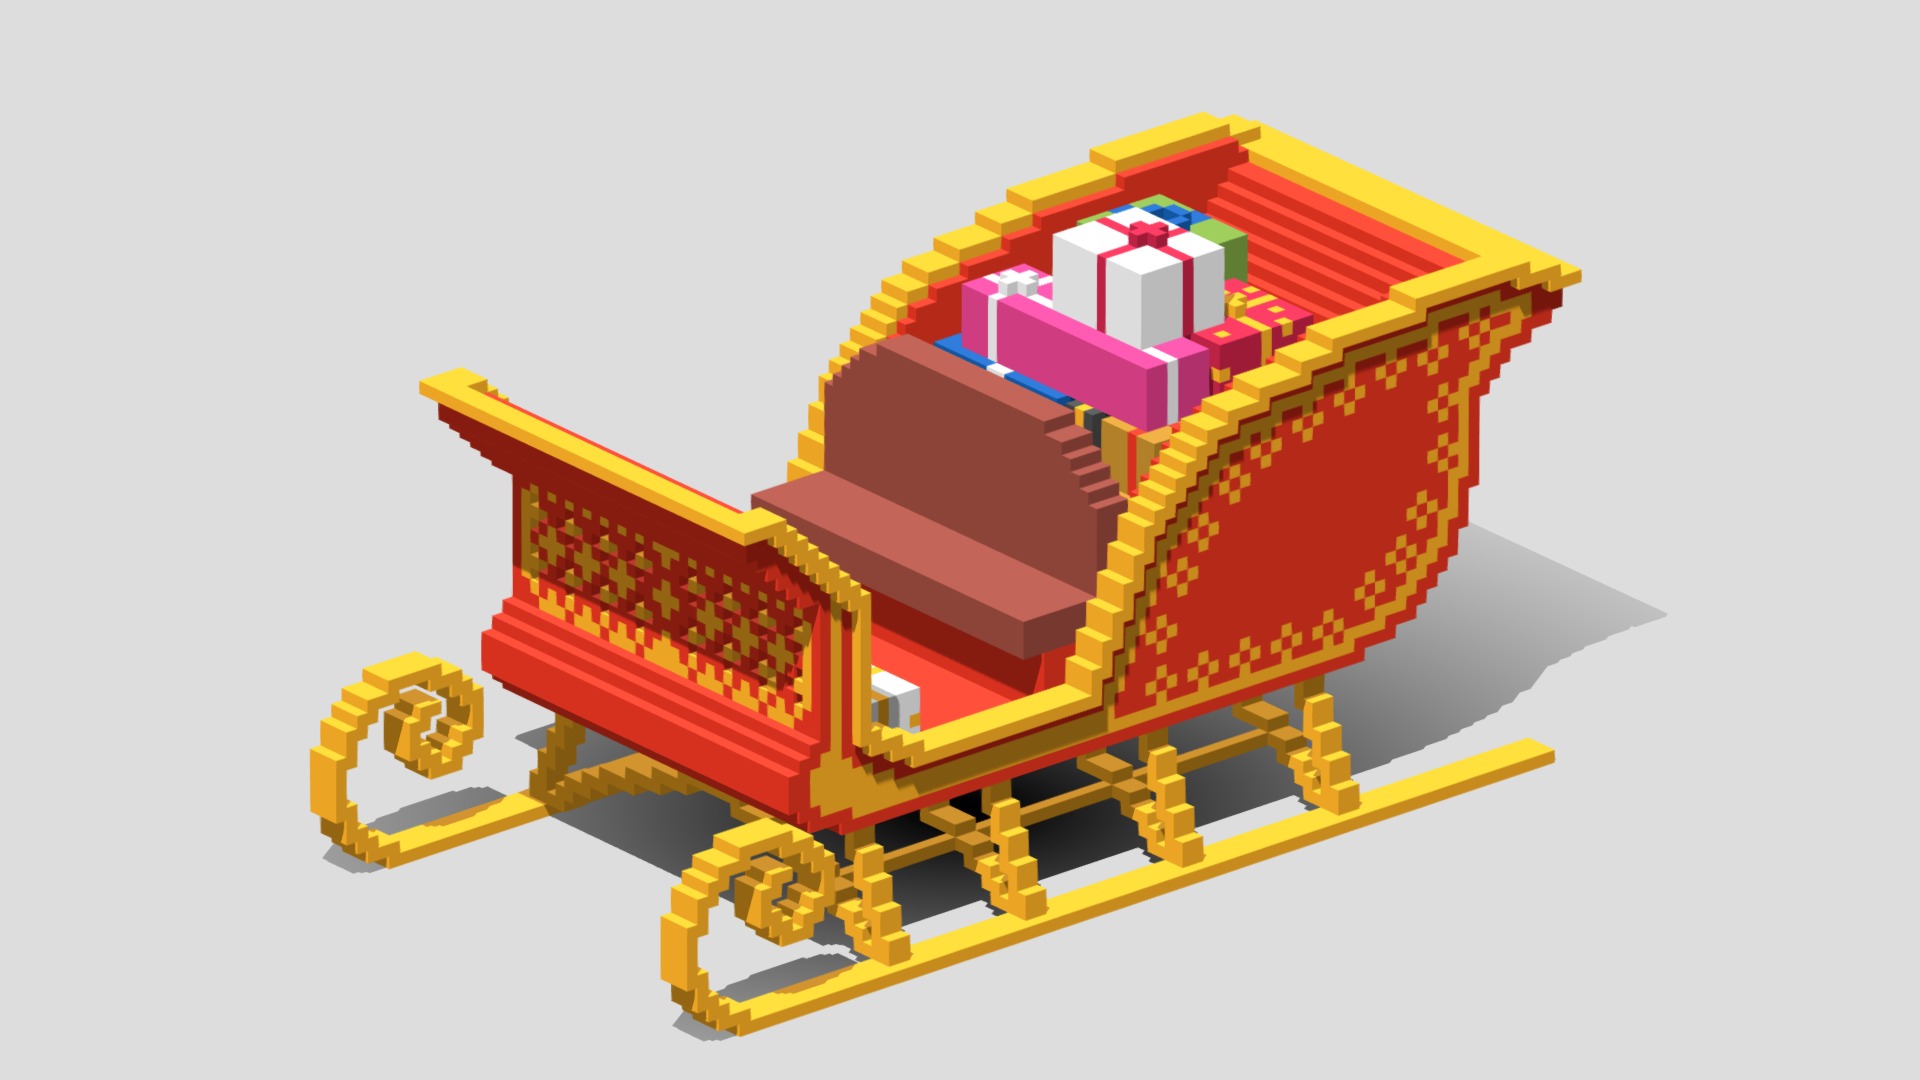 3D model Voxel Santa Claus Cart - This is a 3D model of the Voxel Santa Claus Cart. The 3D model is about a colorful lego structure.